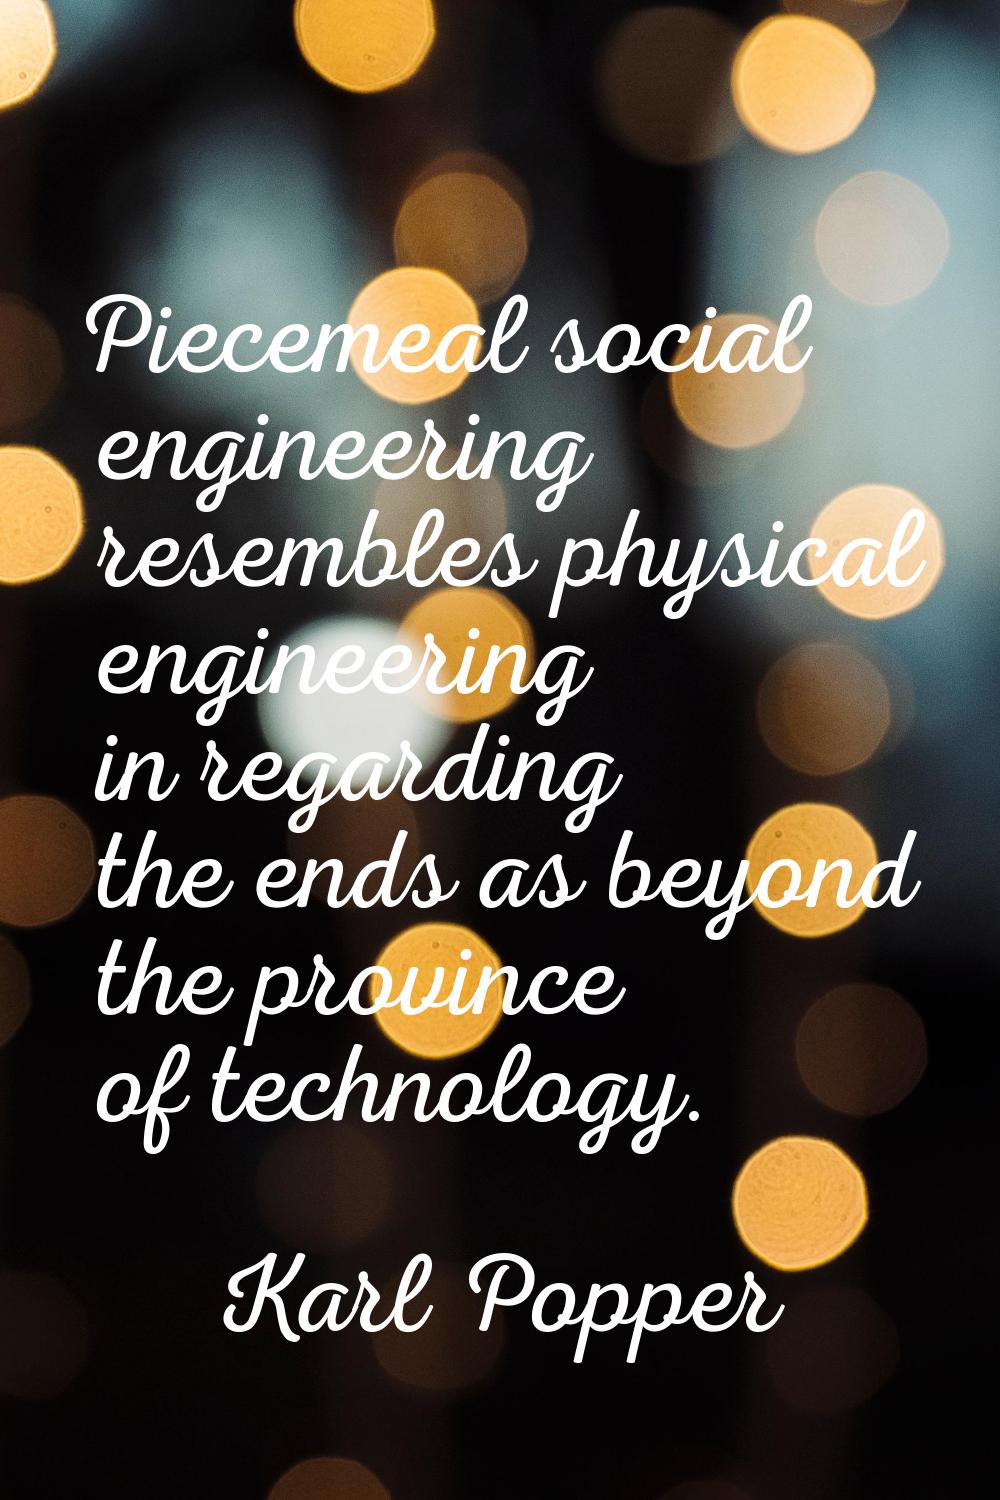 Piecemeal social engineering resembles physical engineering in regarding the ends as beyond the pro